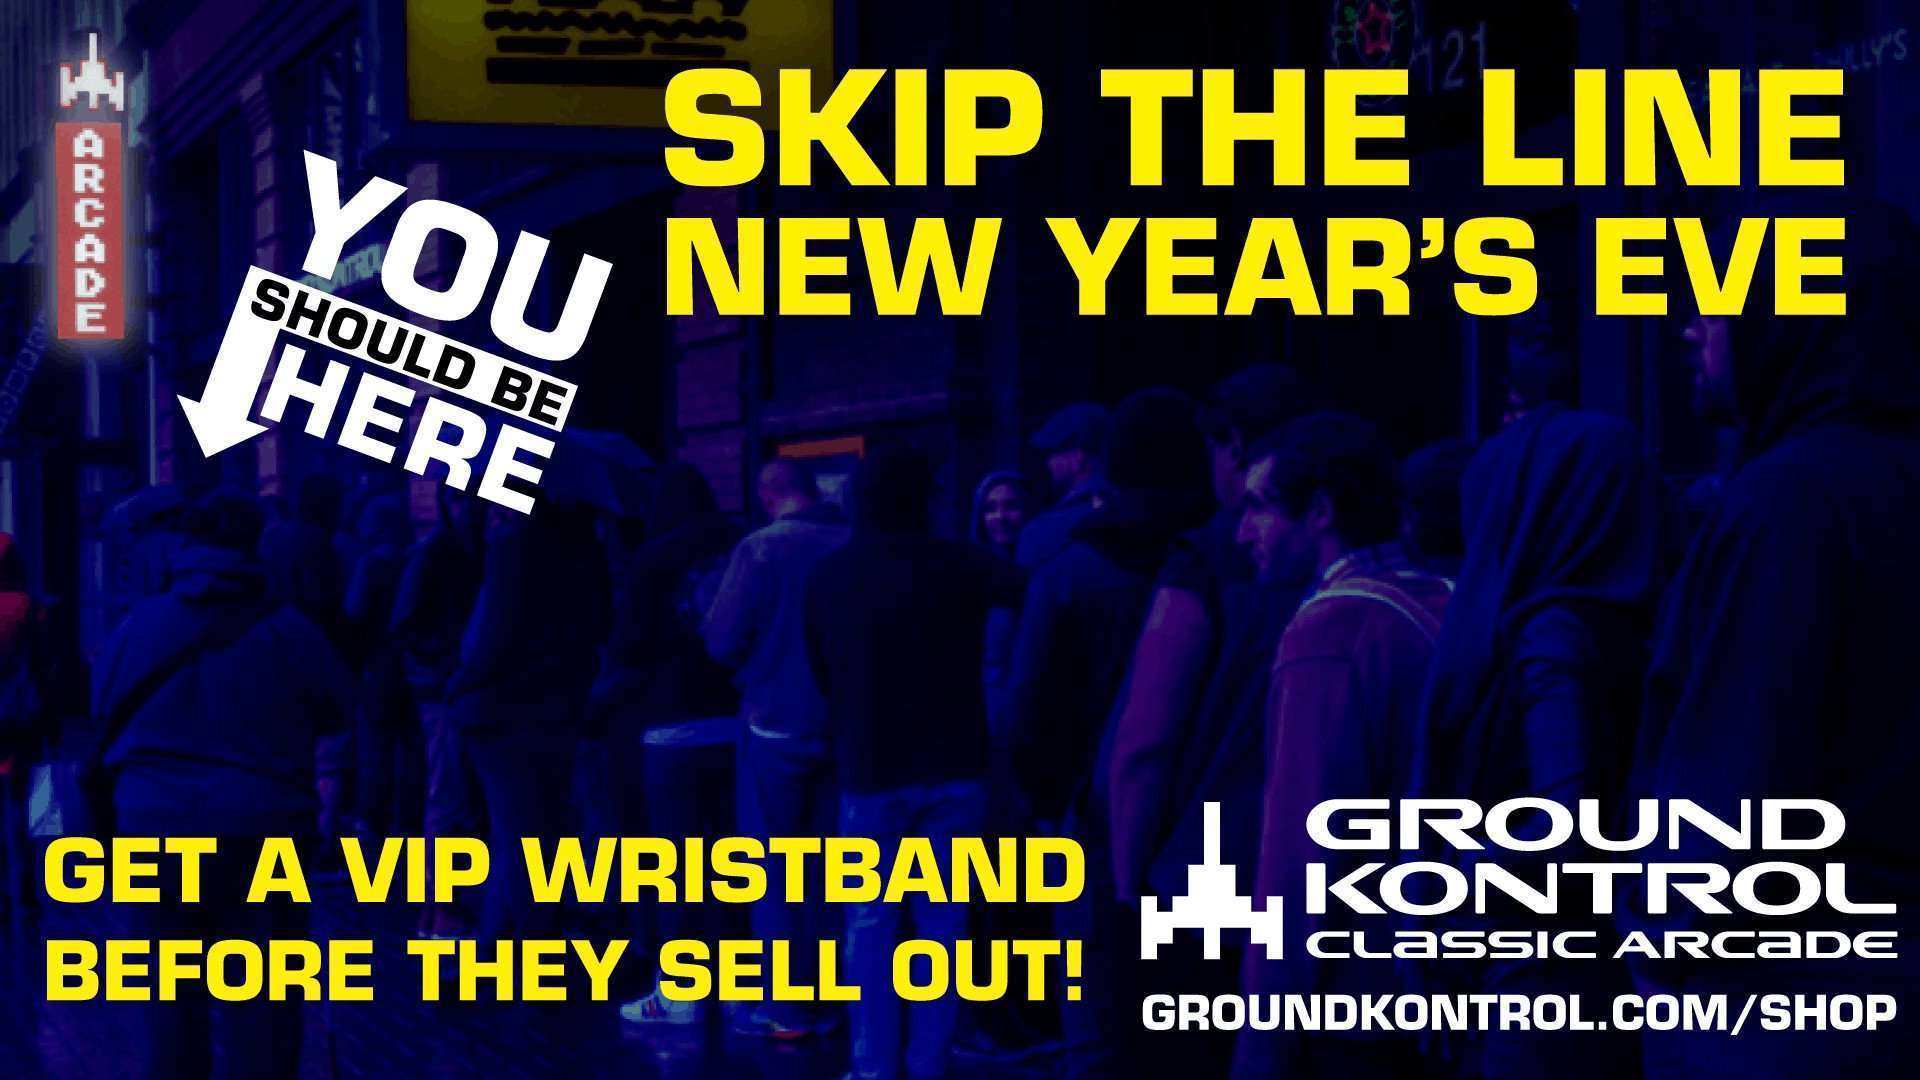 Now Available: New Year’s Eve 2018 VIP Wristbands – While They Last!